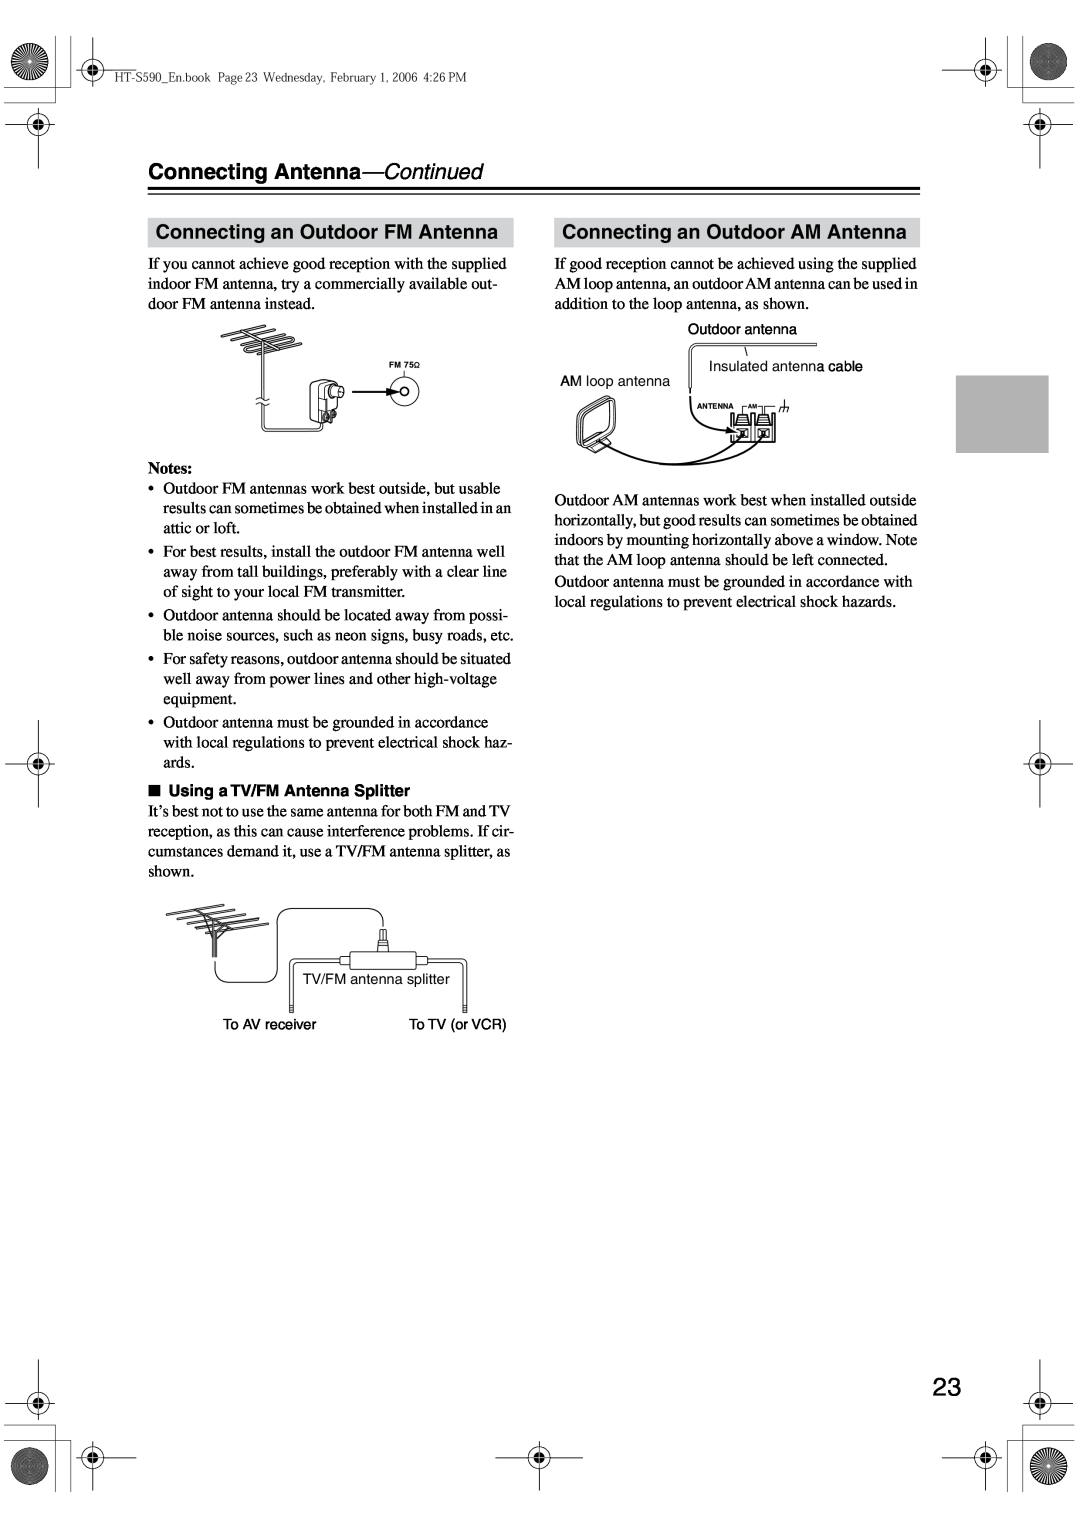 Onkyo SKW-340, SKC-340C Connecting Antenna-Continued, Connecting an Outdoor FM Antenna, Connecting an Outdoor AM Antenna 